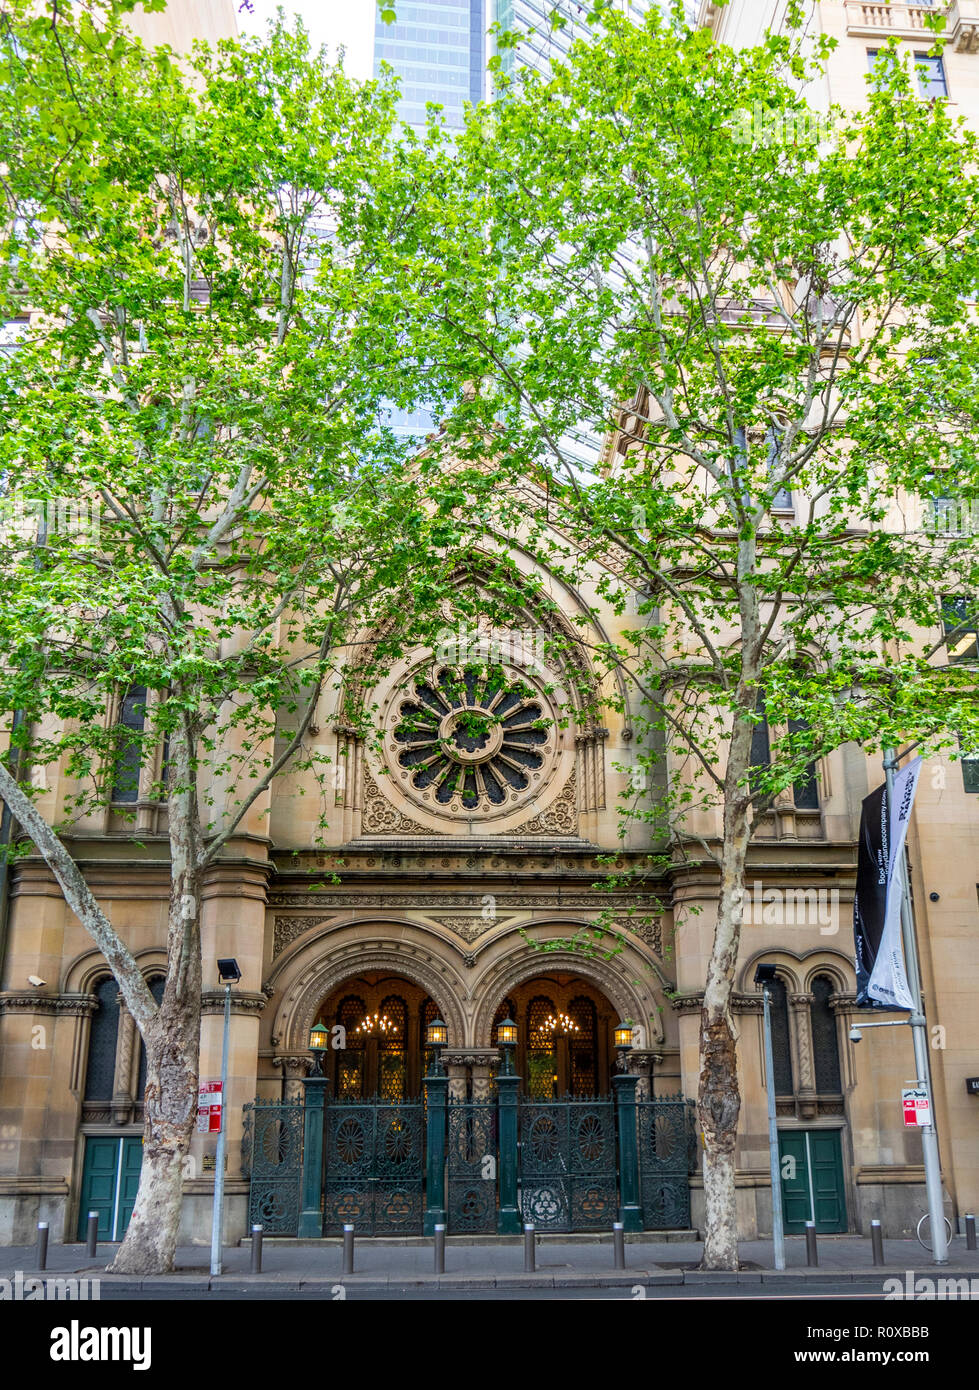 London Plane Trees In Front Of The Great Synagogue Of Sydney